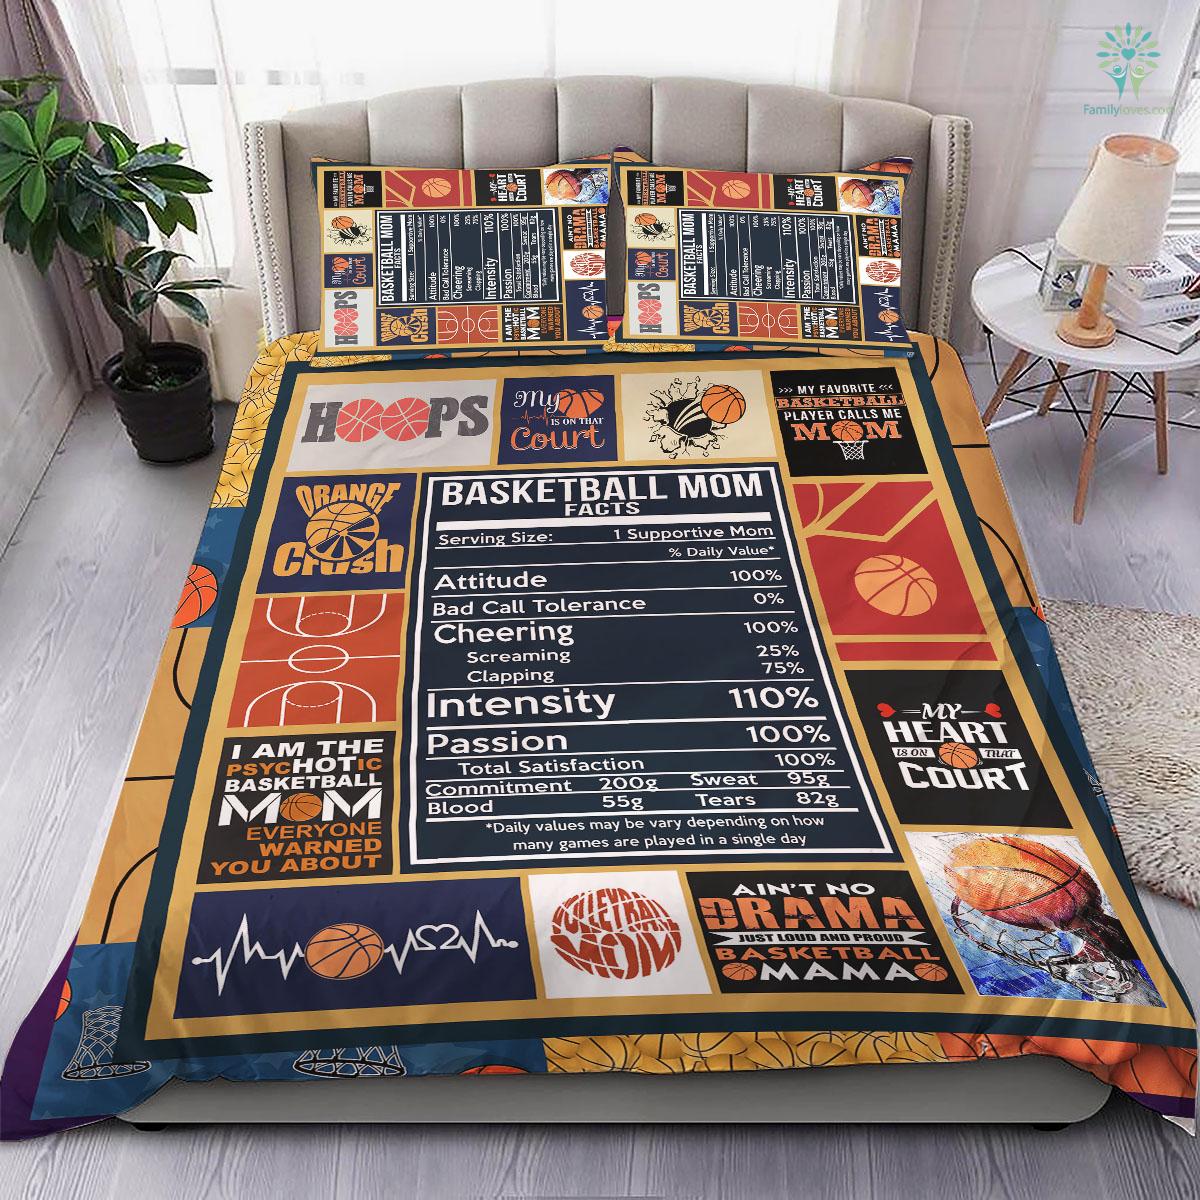 Basketball 3 Bedding Set - Family Loves US Military Veterans Shirts Gifts Ideas